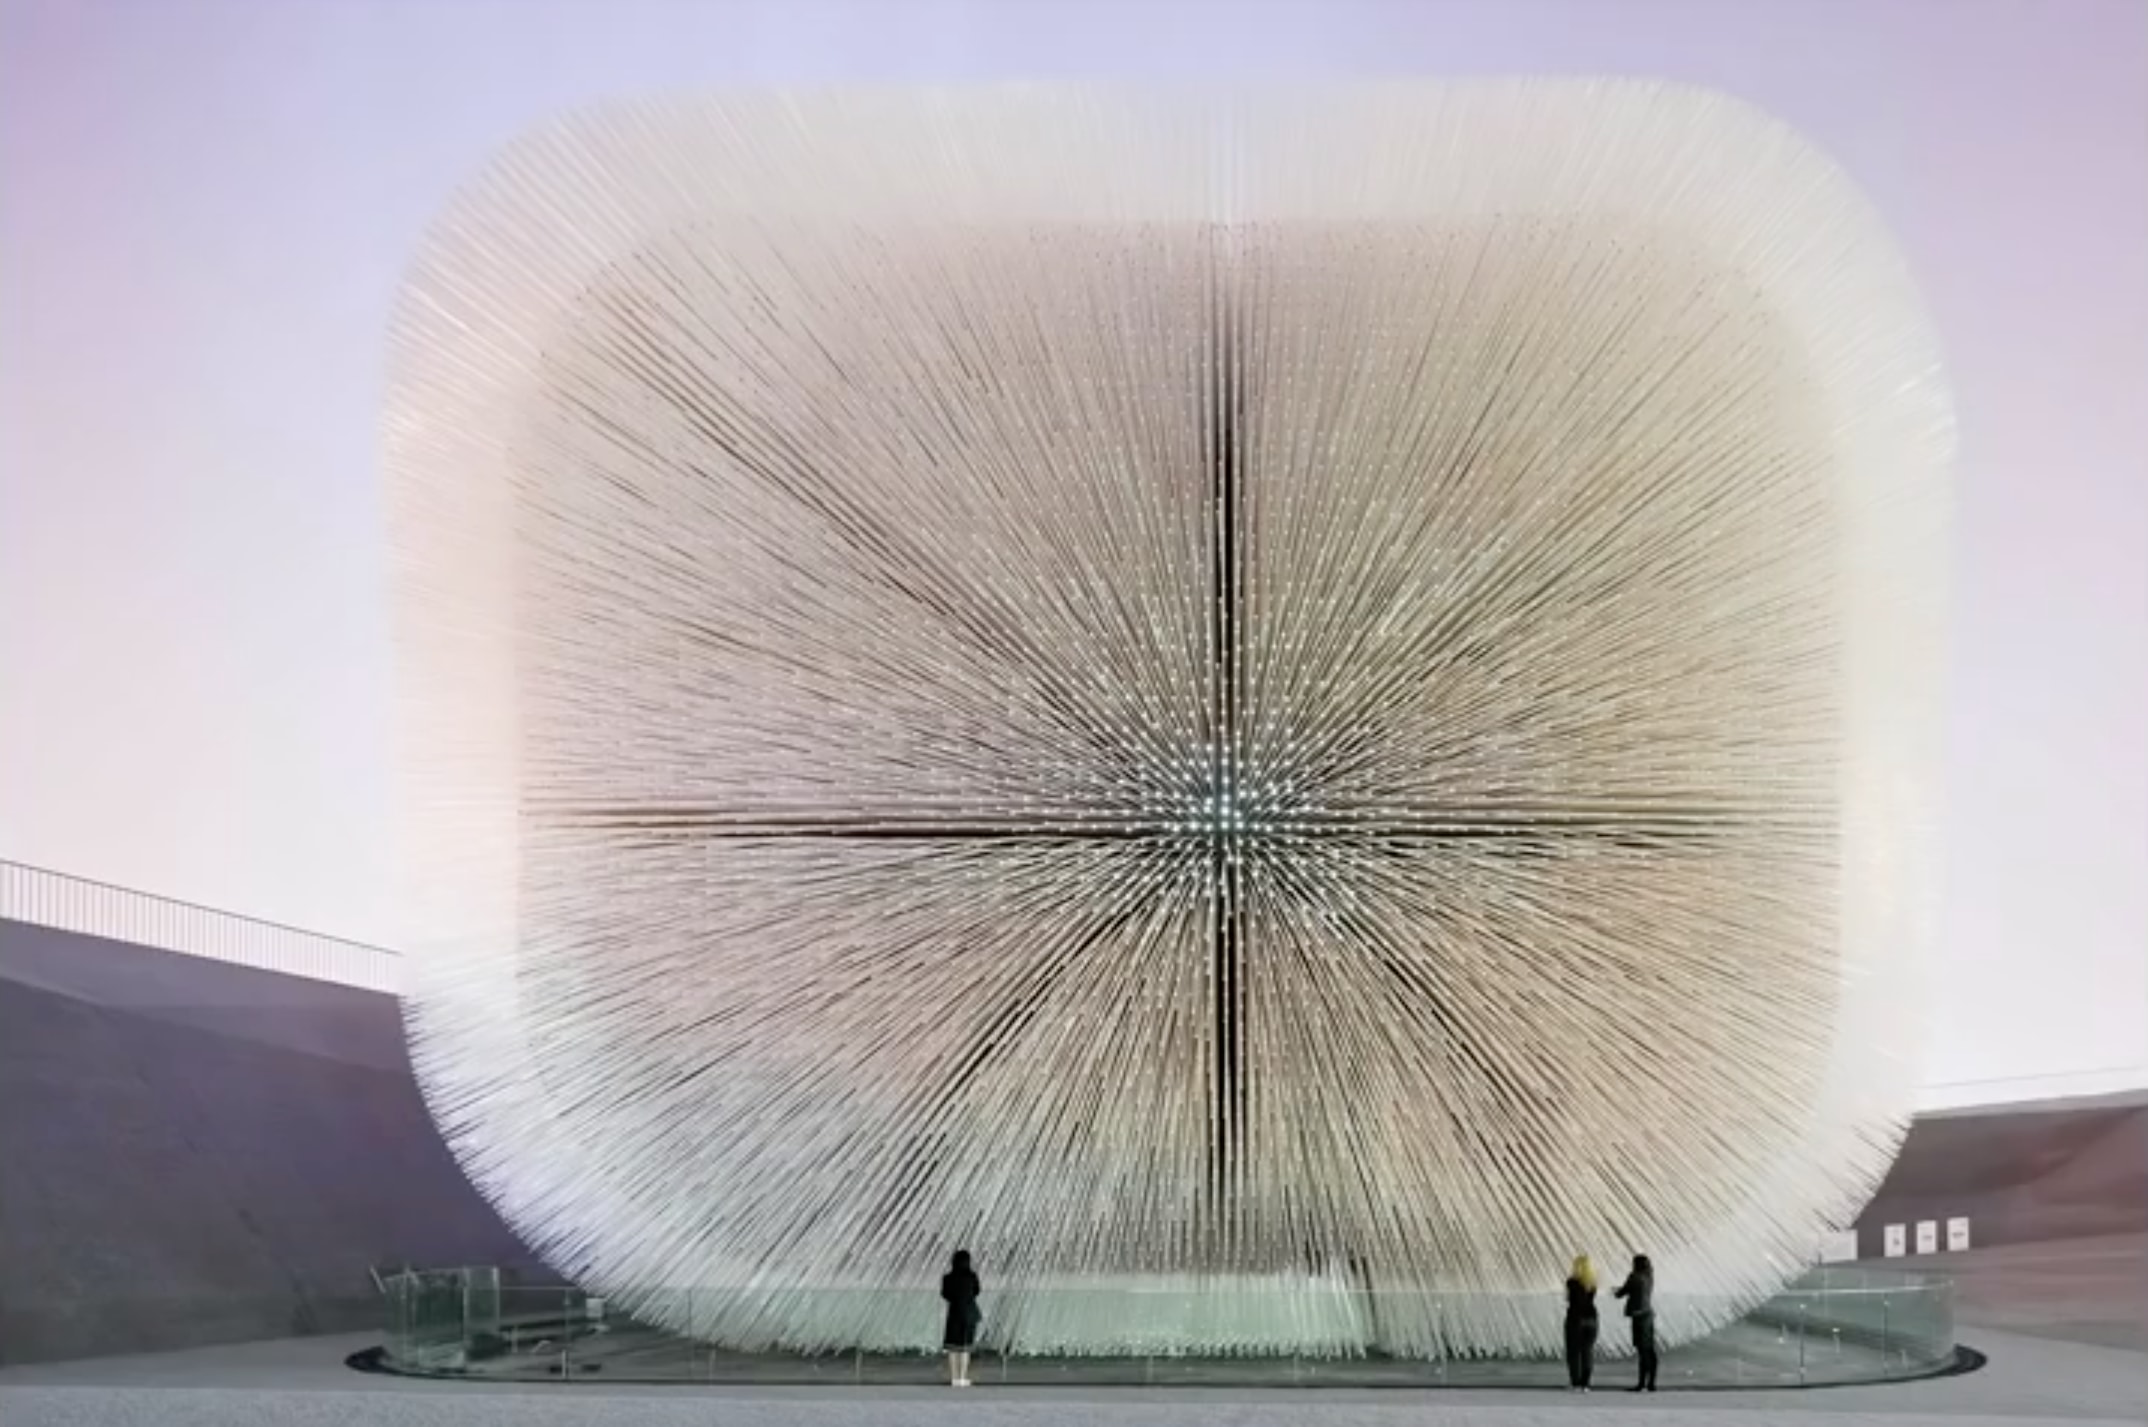 Heatherwick's seed cathedral